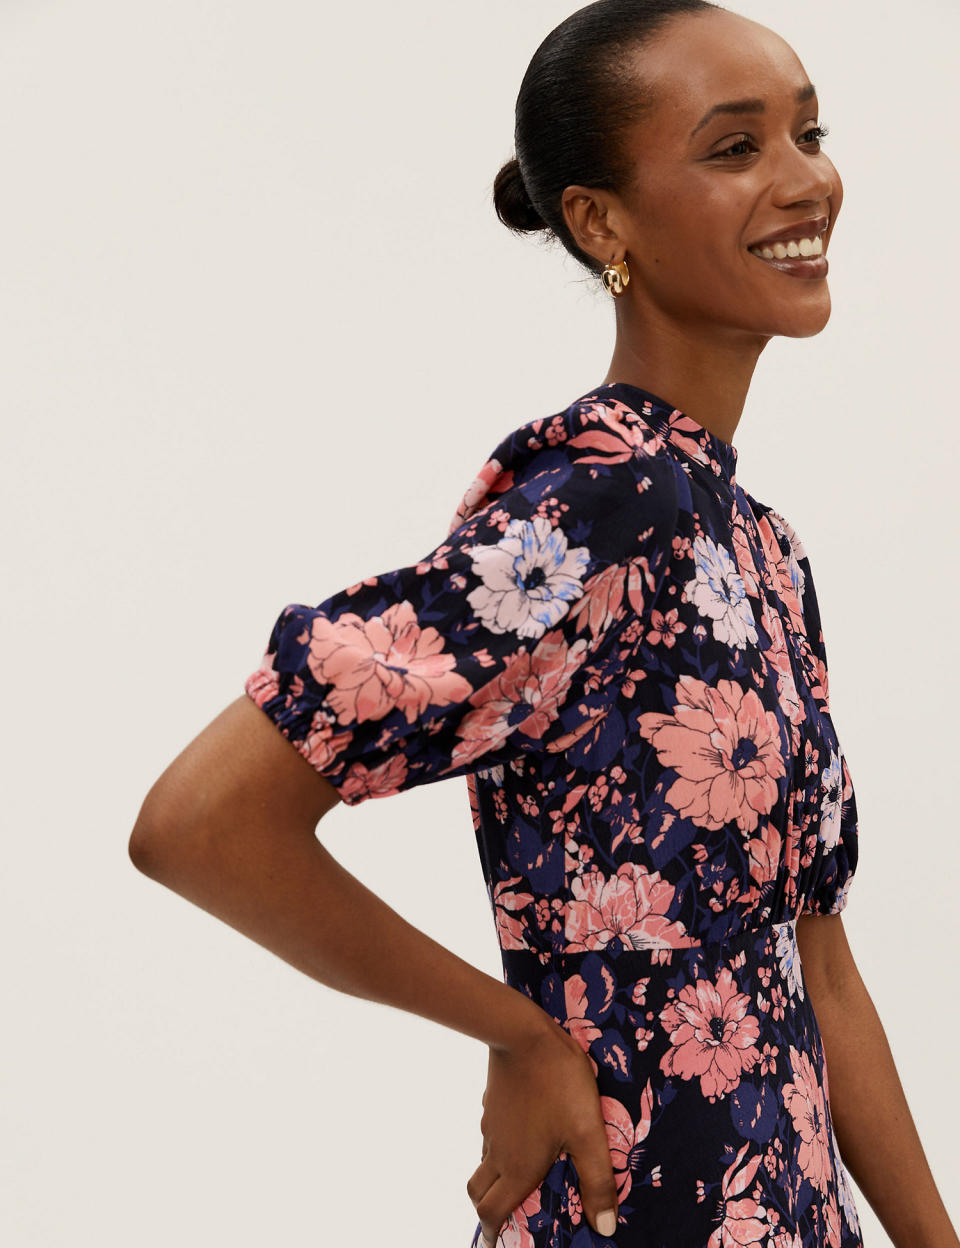 The tea-dress is tapered under the bust for a flattering silhouette. (M&amp;S)